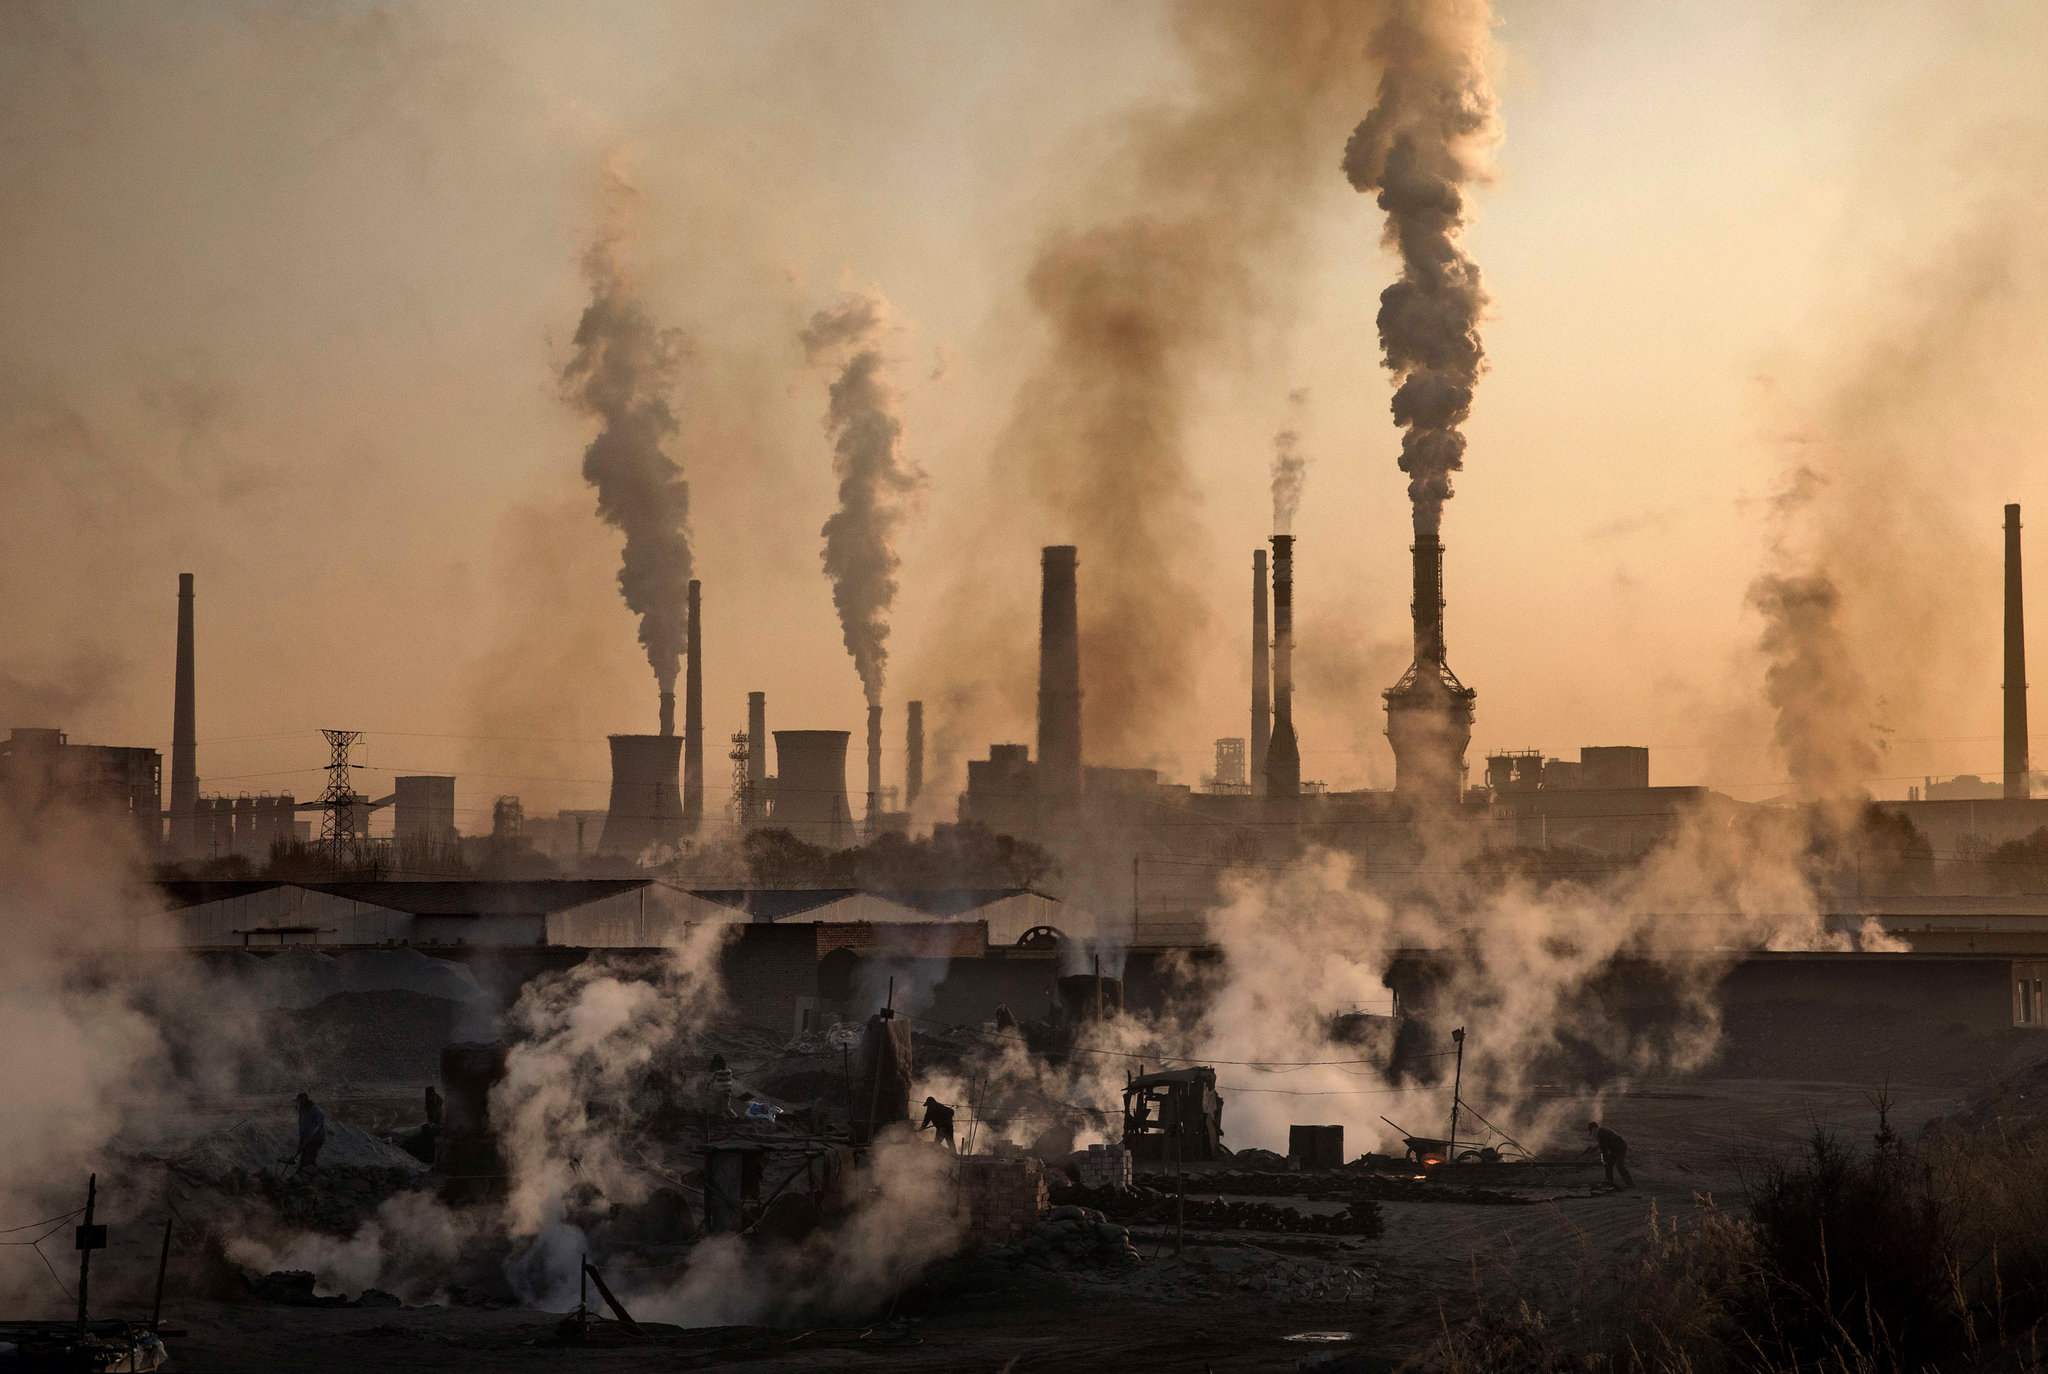 China’s industrial output drops with emission limits, while renewables rise